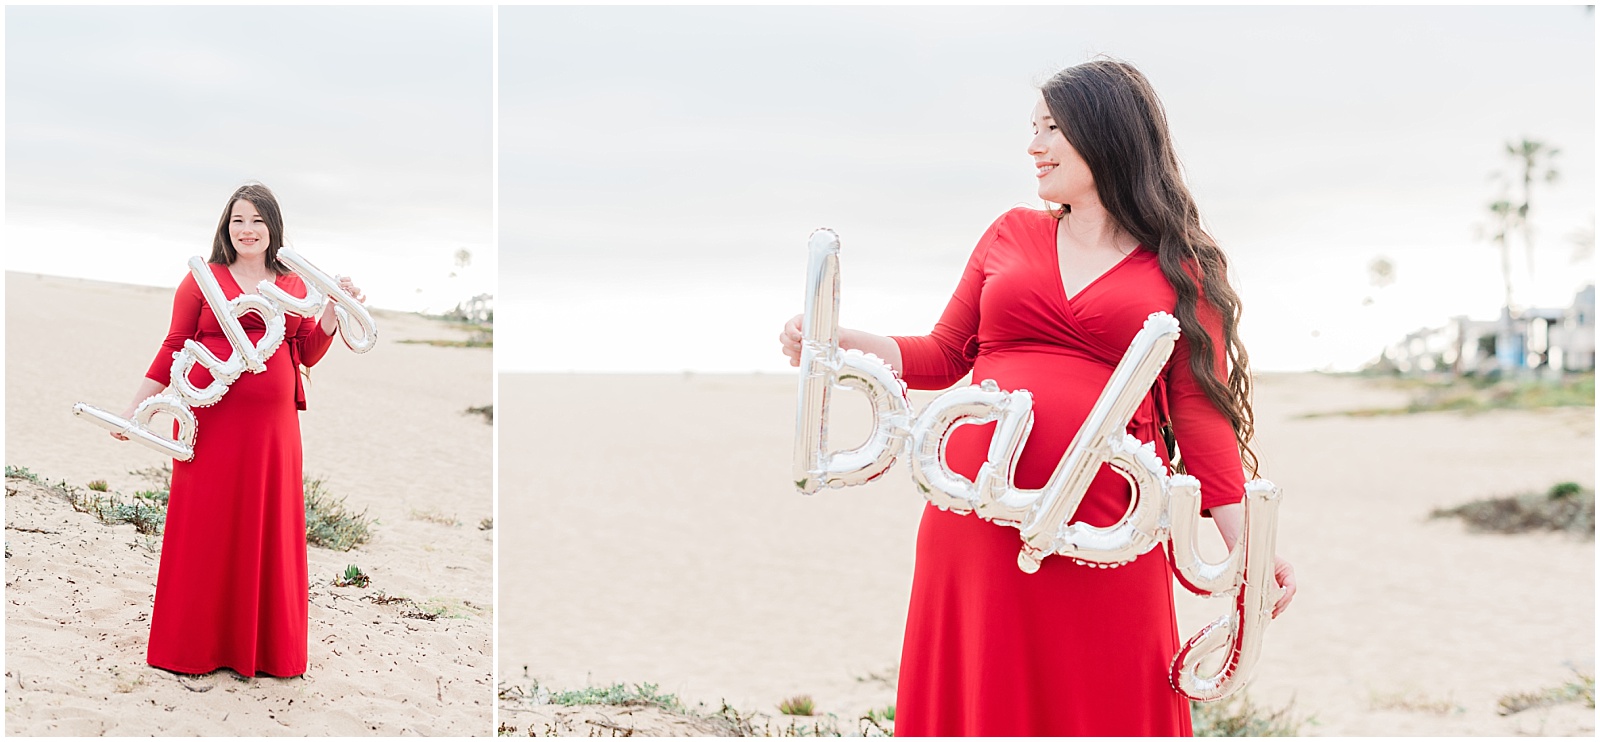 Newport Beach Maternity session. Photographed by Mollie Jane Photography.  To see more, go to www.molliejanephotography.com